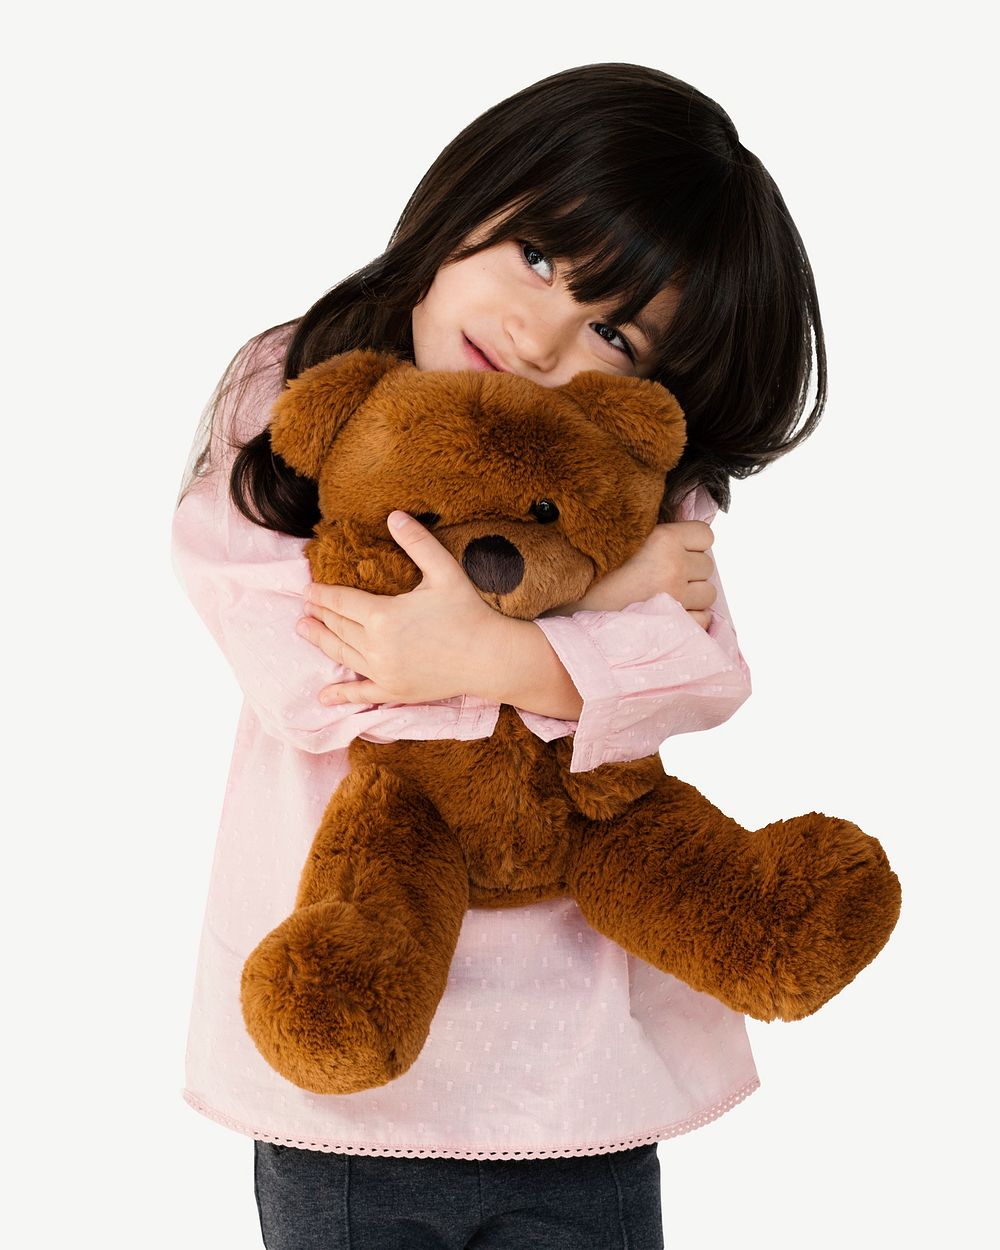 Girl holding teddy bear collage element psd